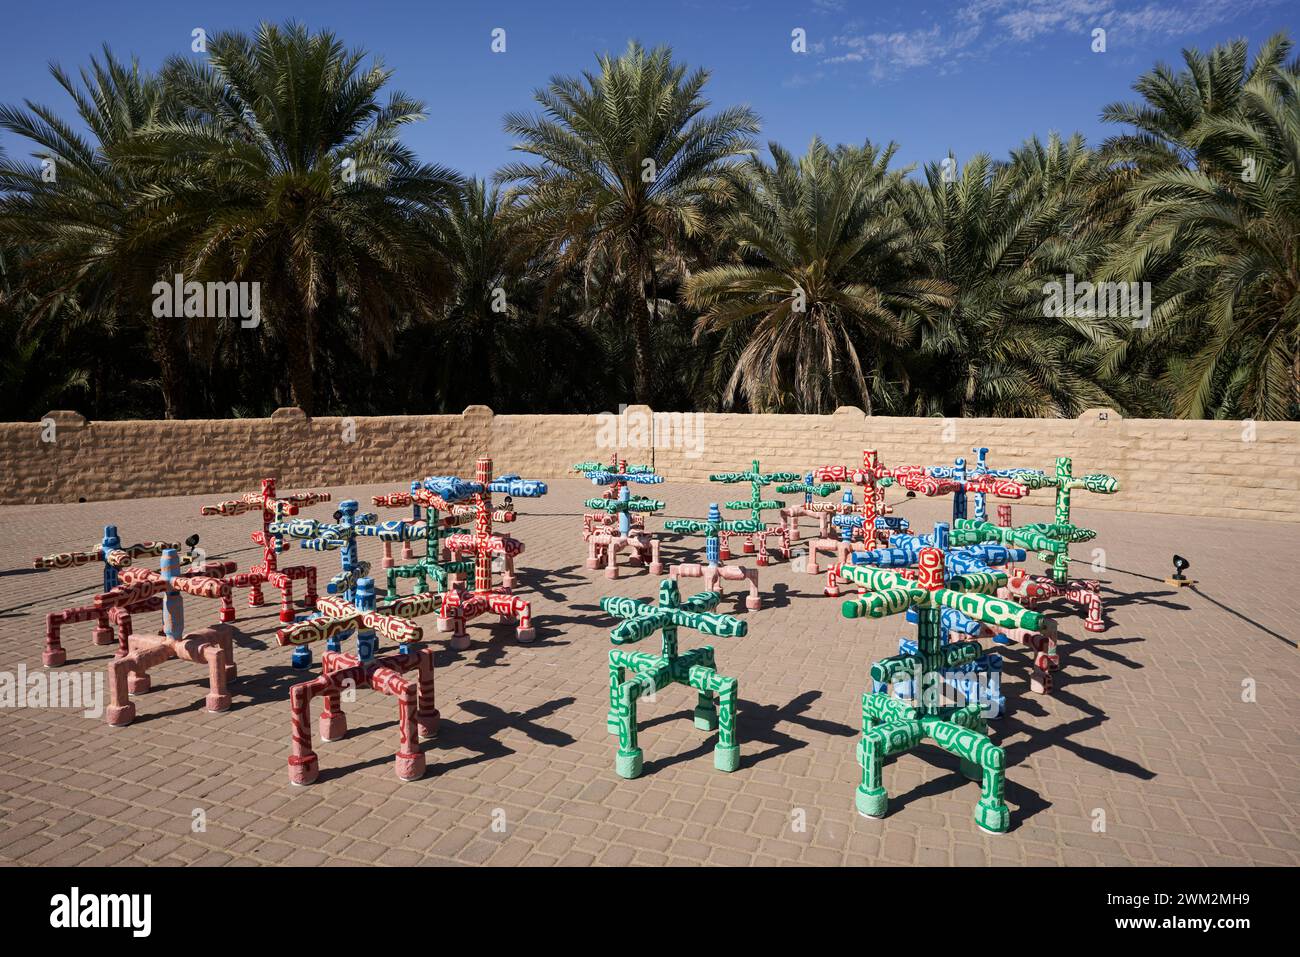 Mohamed Ahmed Ibrahim installation called Al Ain Oasis, at Al Ain. It was commissioned by Abu Dhabi Art. Stock Photo